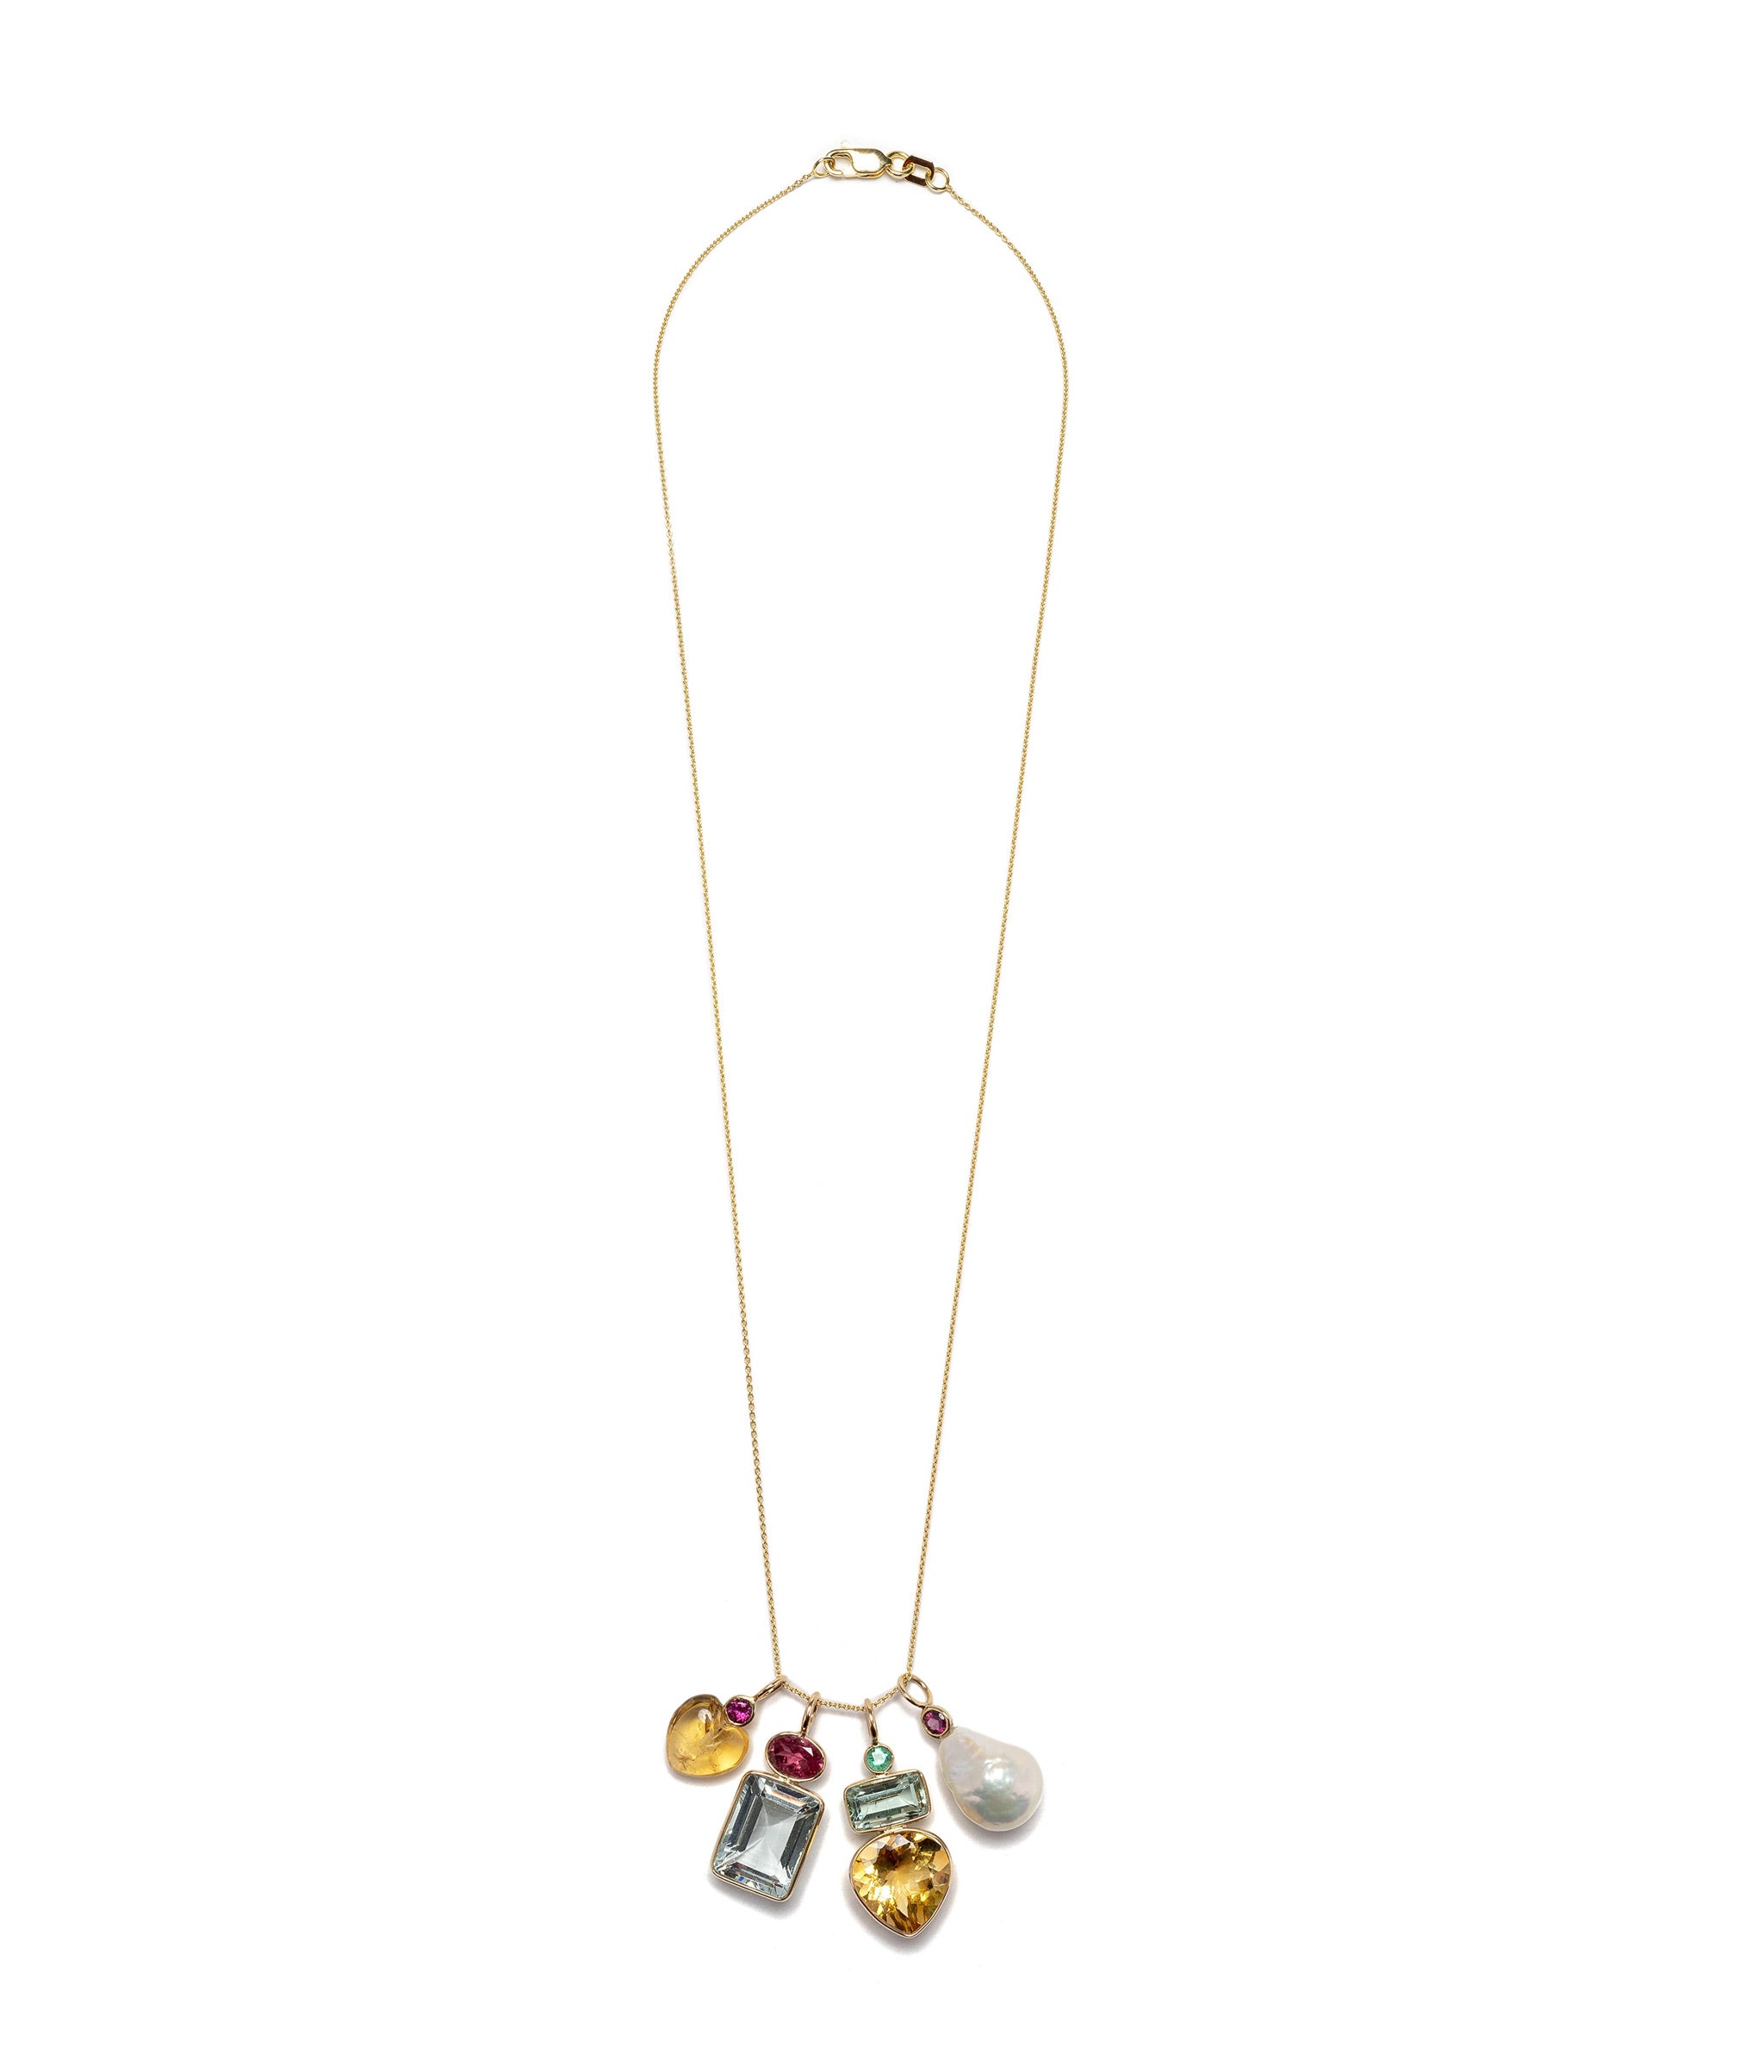 14K Gold Super Fine Chain Necklace with four colorful Mood Necklace Charms attached.